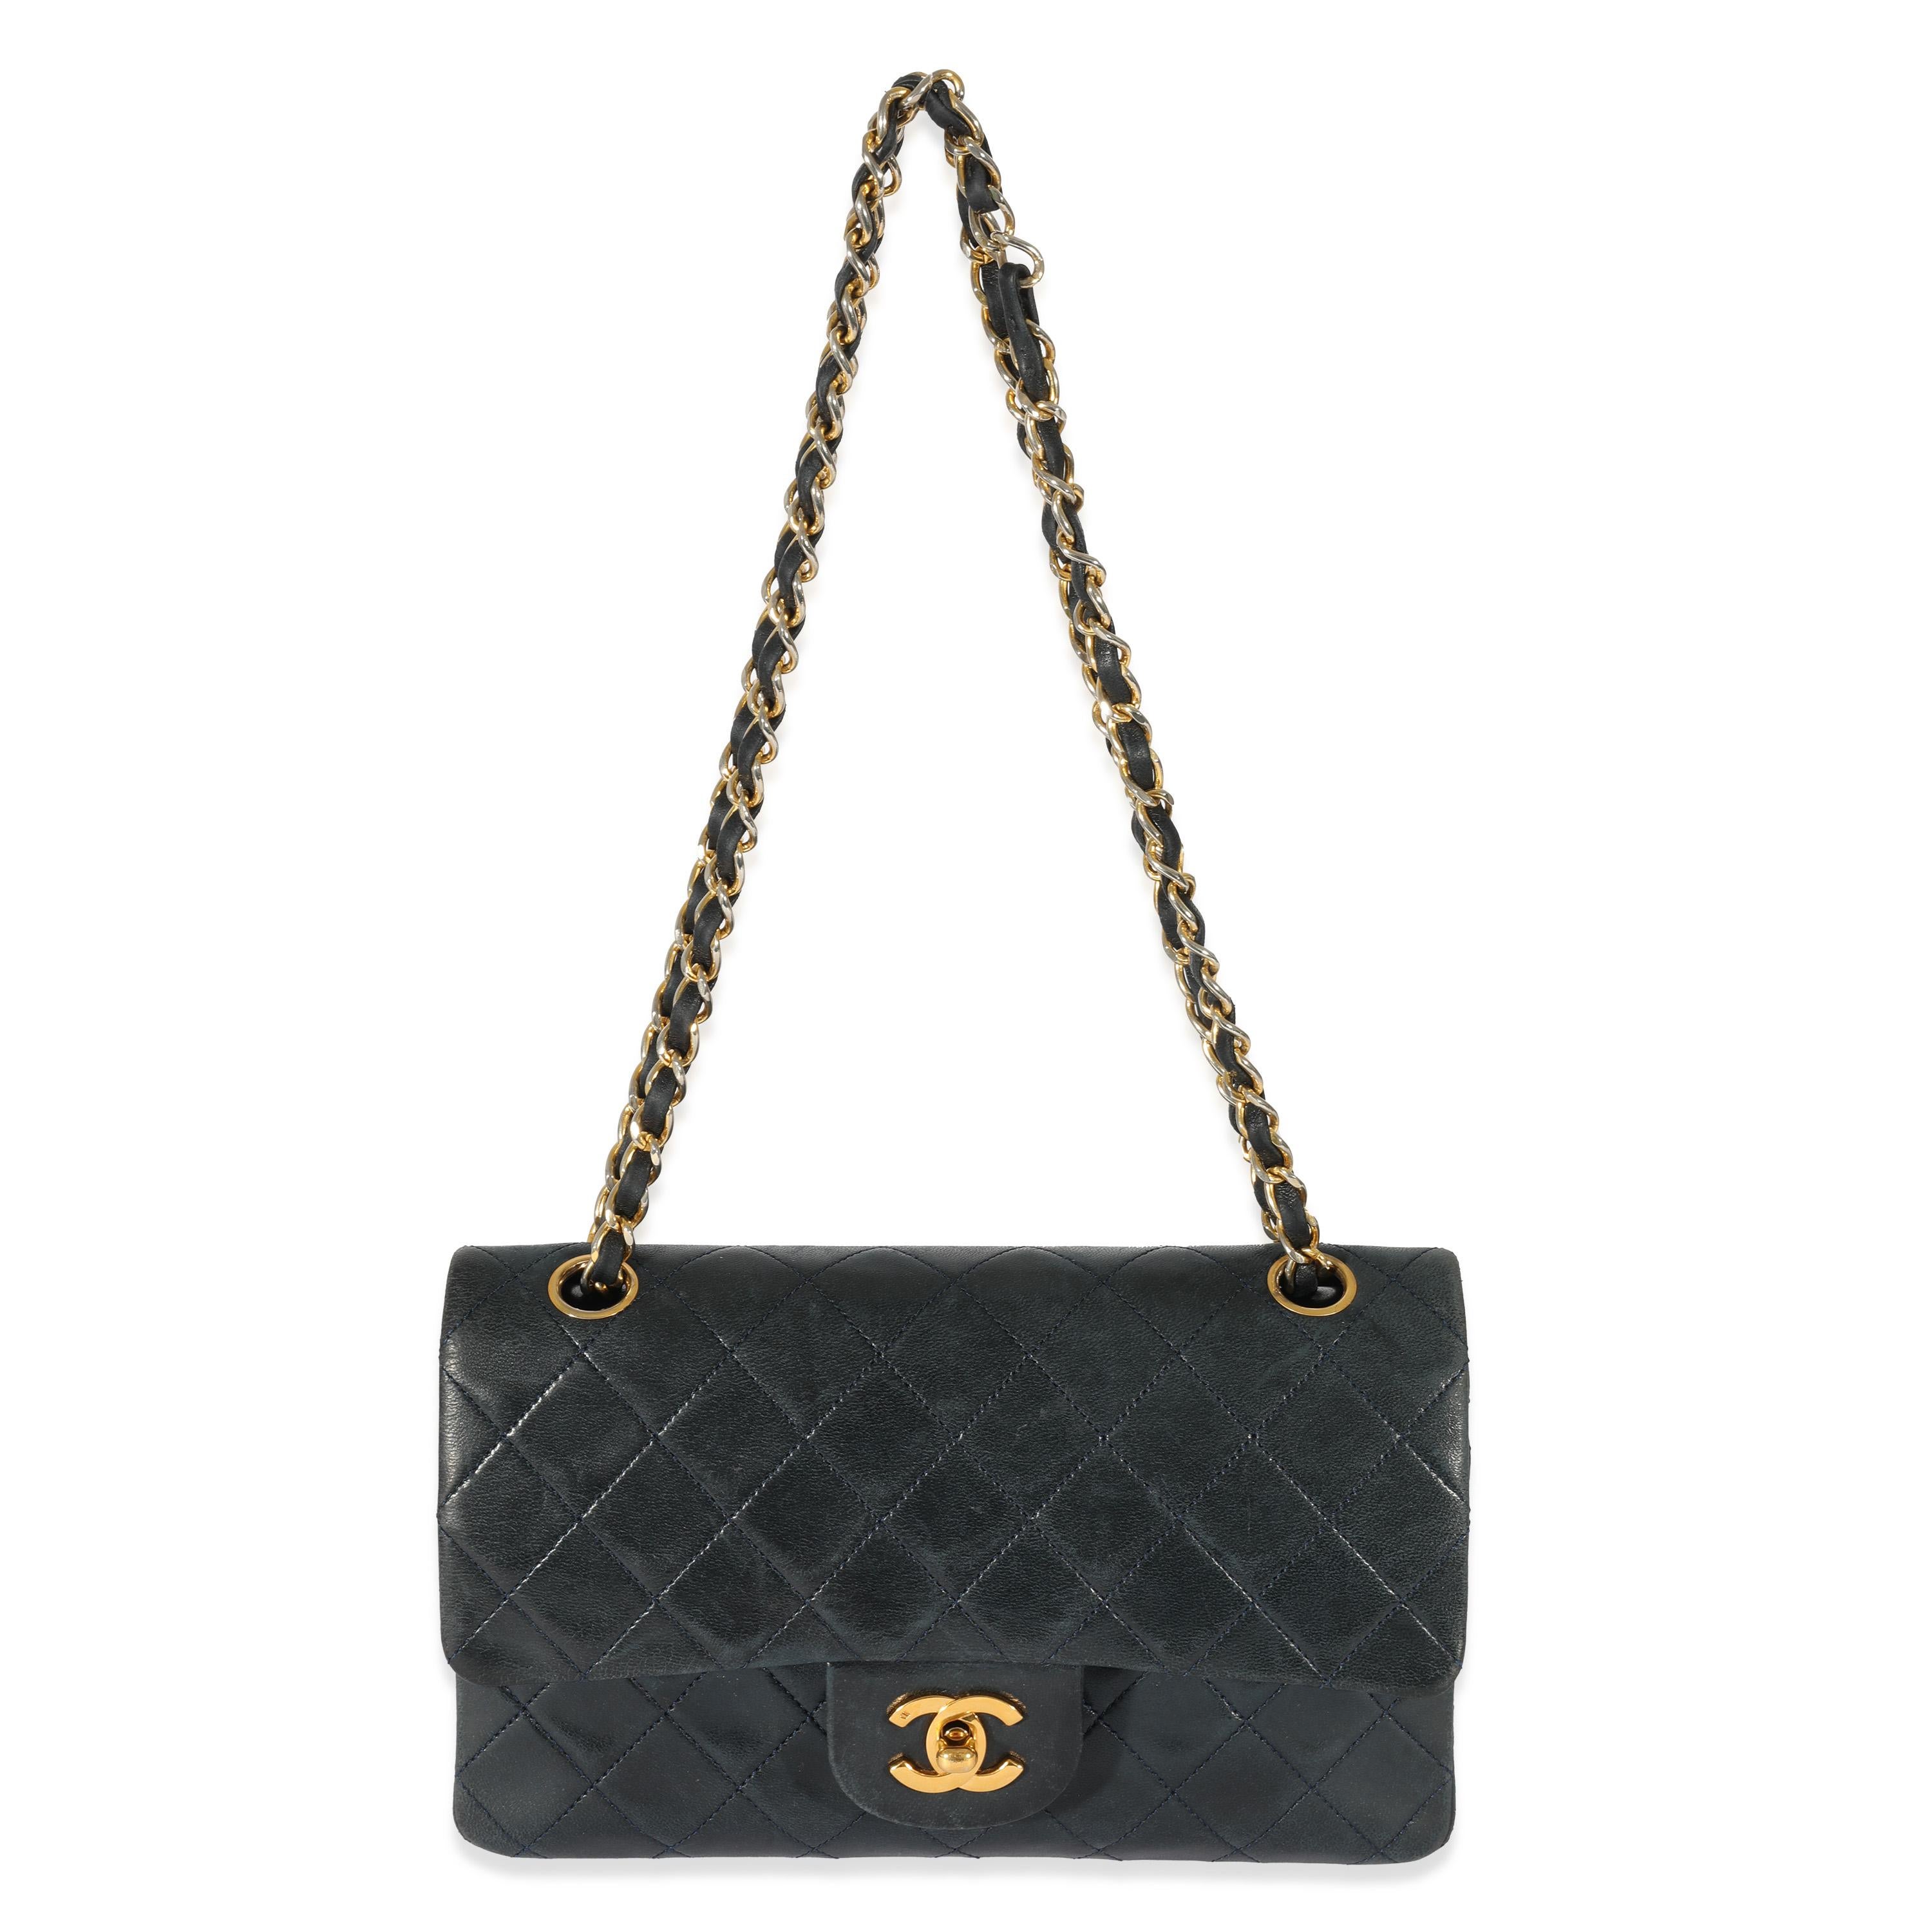 Listing Title: Chanel Vintage Navy Lambskin Small Classic Flap
SKU: 129919
Condition: Pre-owned 
Handbag Condition: Good
Condition Comments: Good Condition. Heavy exterior discoloration, scuffing, indentation, and marks. Heavy scratching and